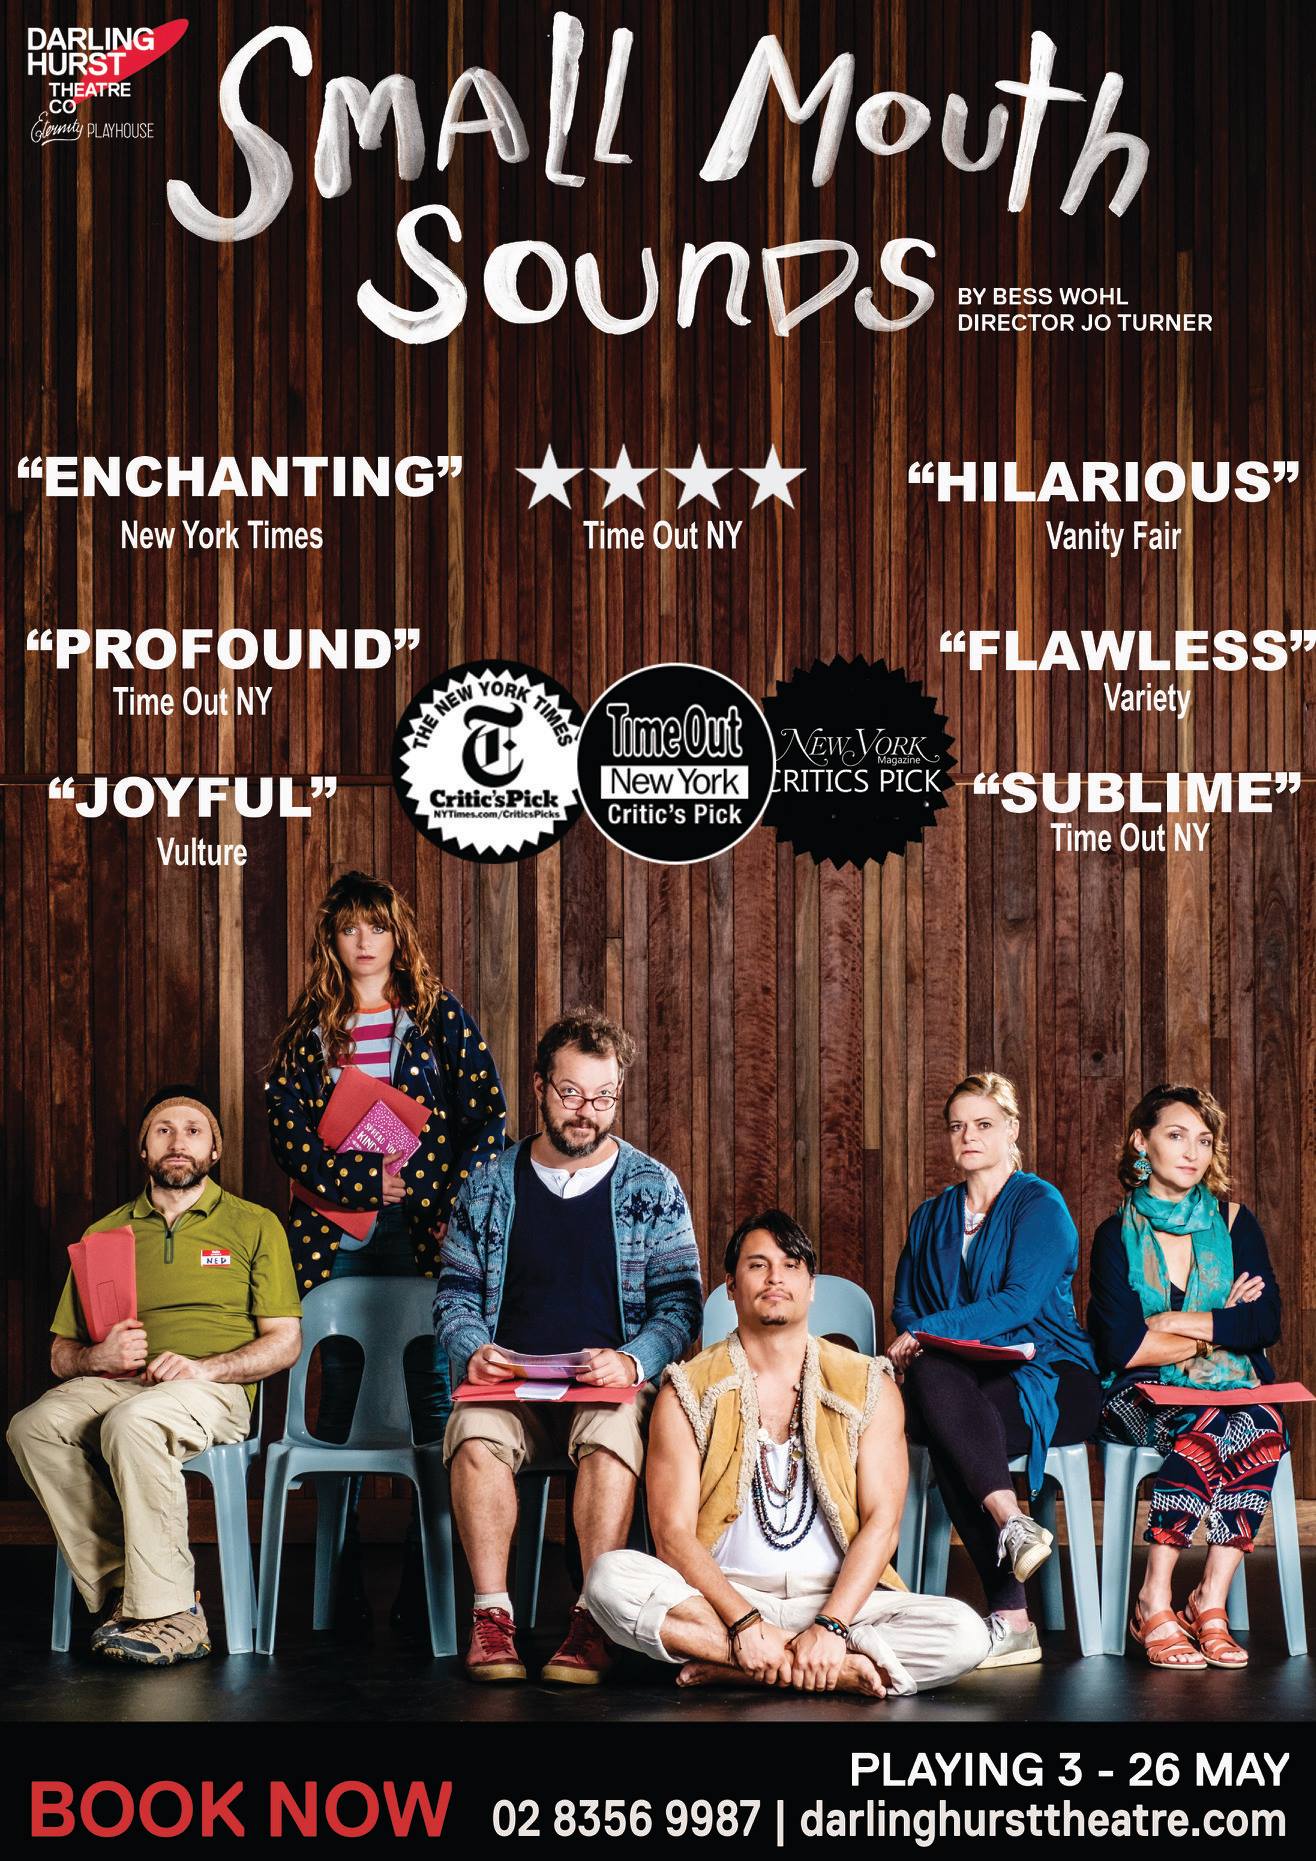 Small Mouth Sounds at Darlinghurst Theatre Company